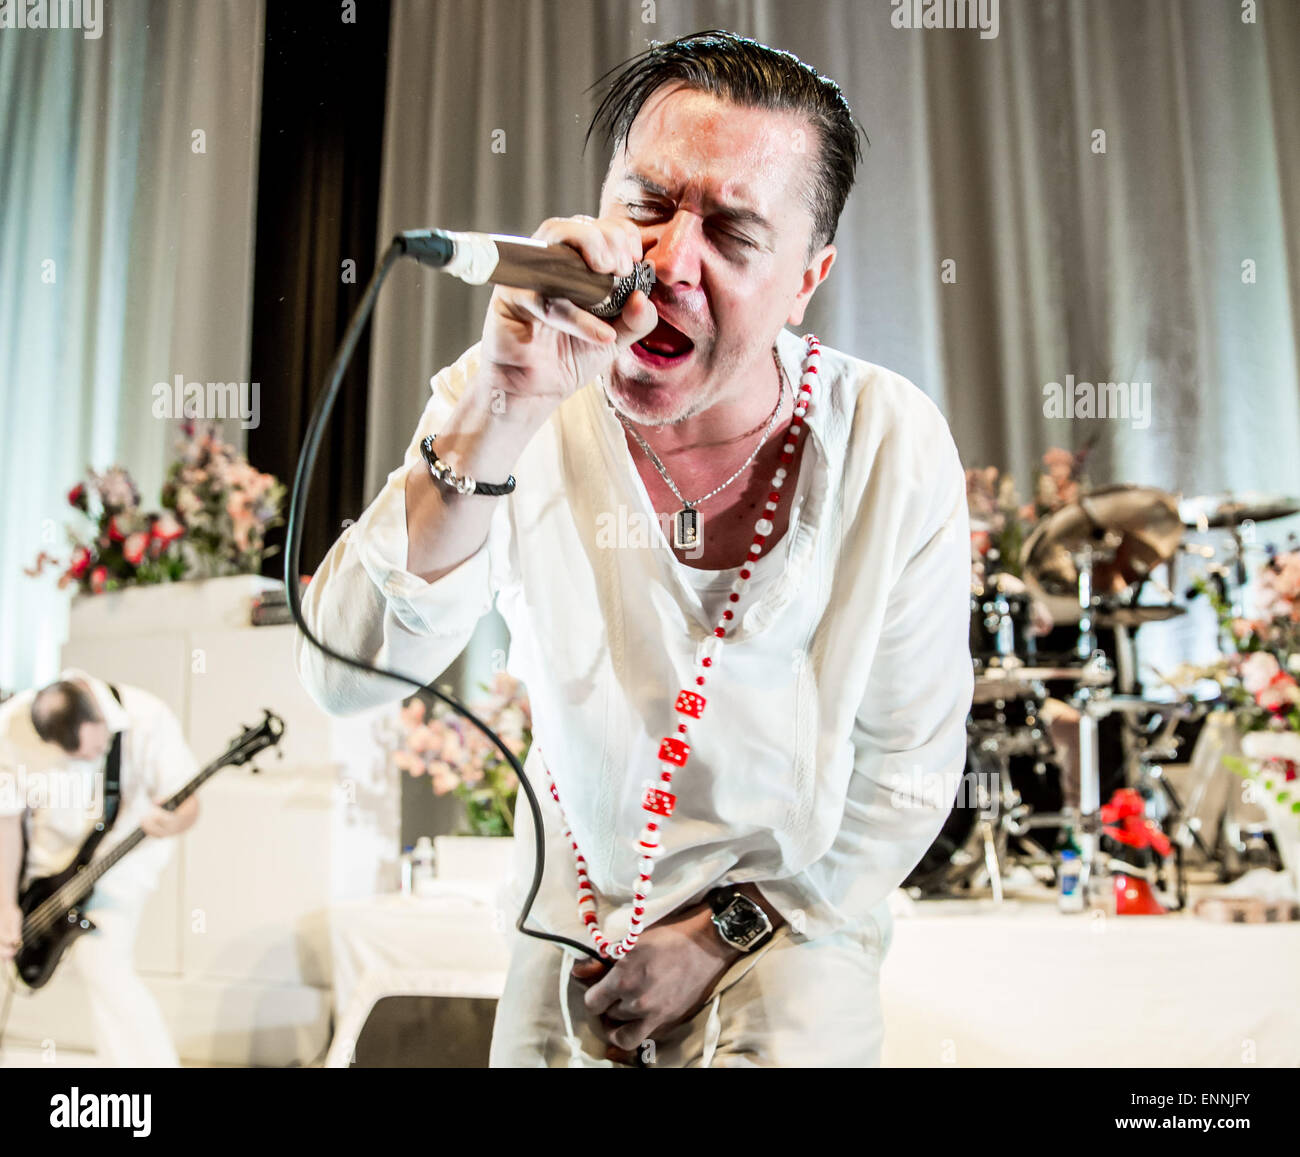 Detroit Michigan Usa 8th May 15 Mike Patton Of Faith No More Performing On The North American Tour At The Fillmore In Detroit Mi On May 8th 15 Credit Marc Nader Zuma Wire Alamy